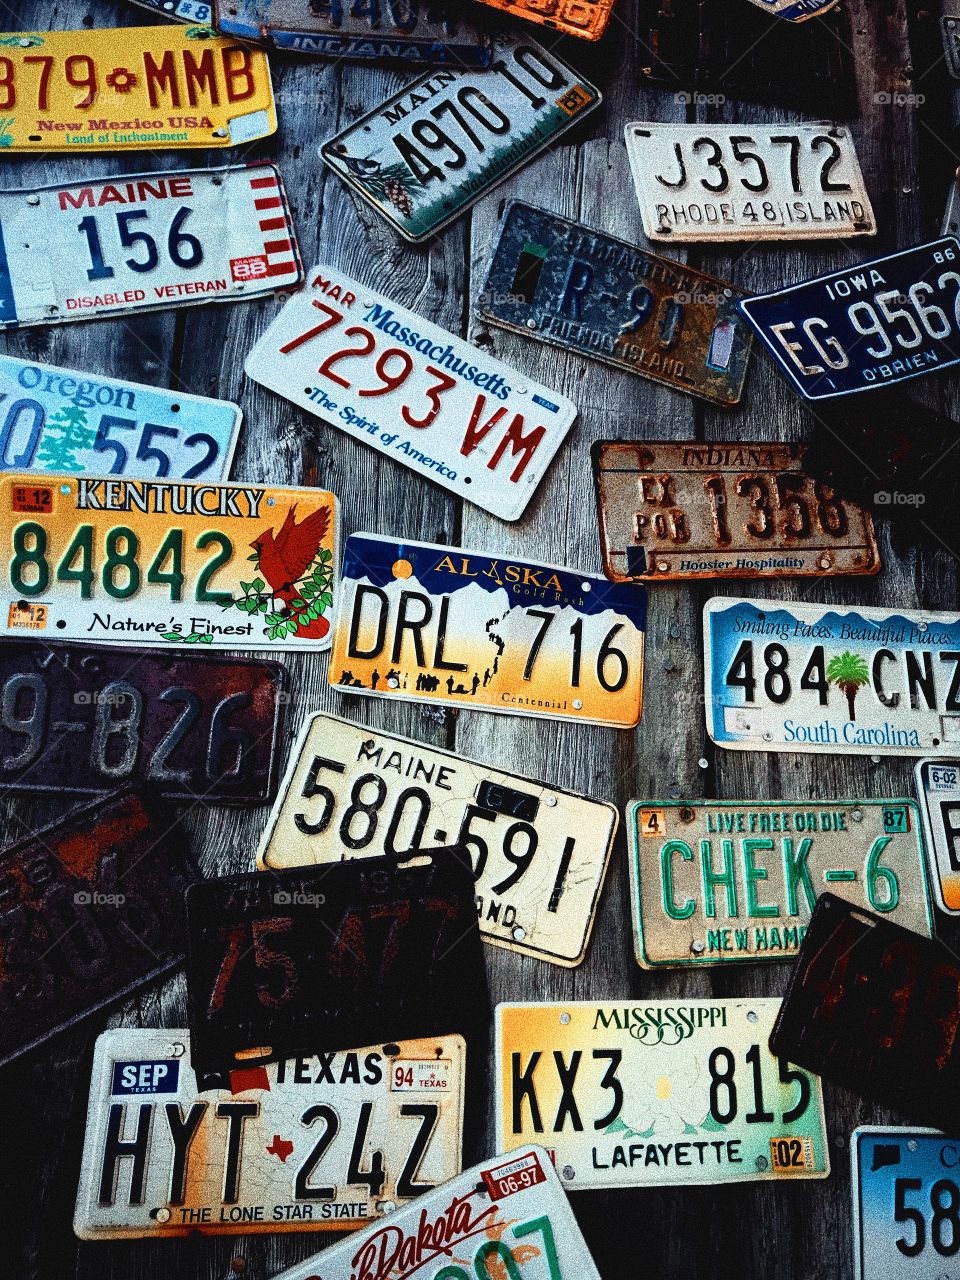 License Plates on a Wall